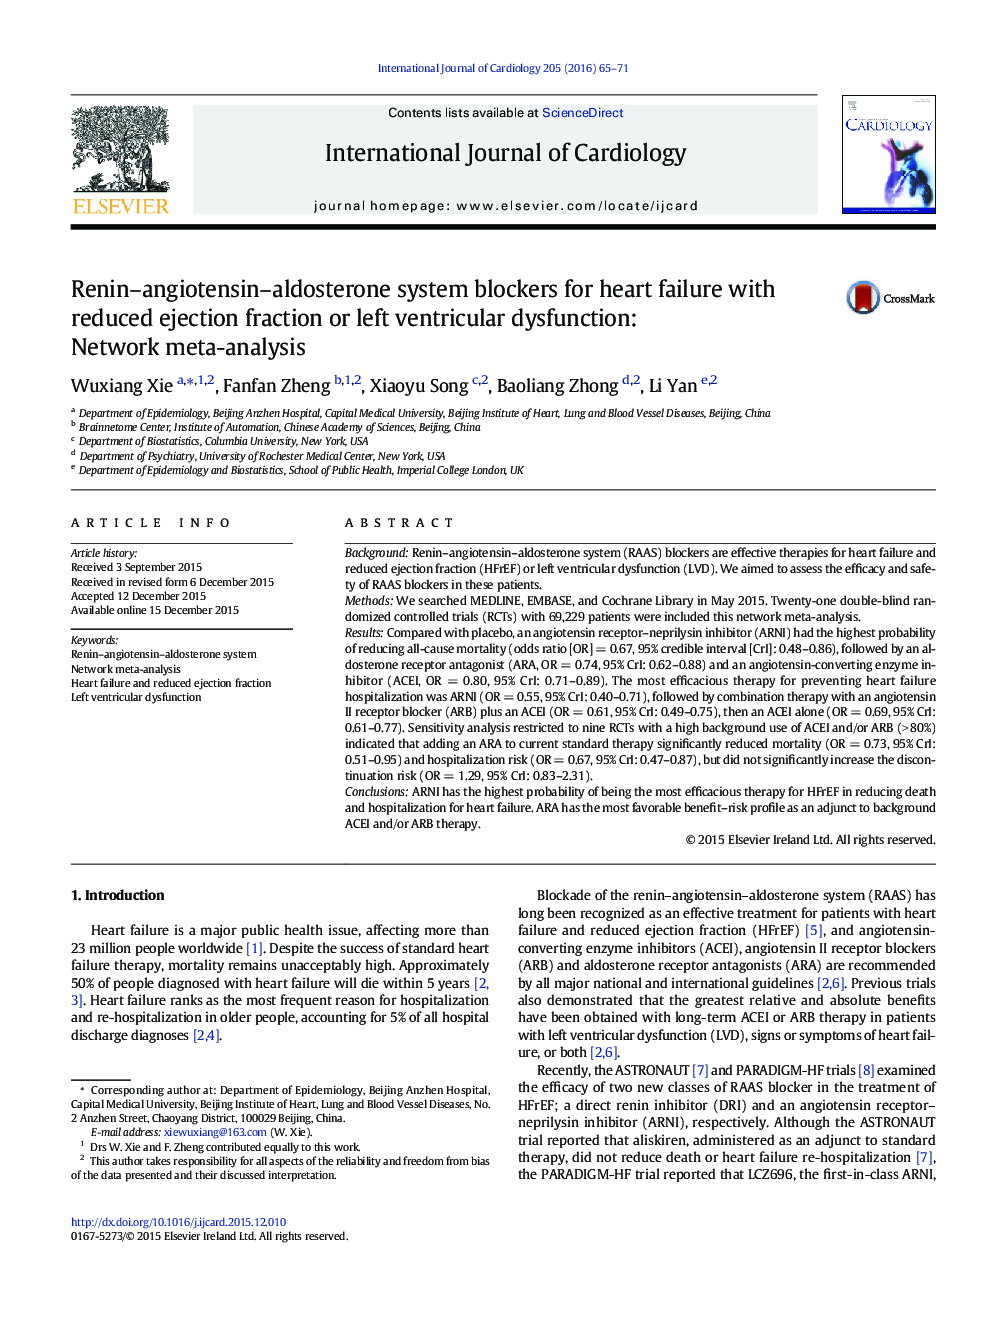 Renin–angiotensin–aldosterone system blockers for heart failure with reduced ejection fraction or left ventricular dysfunction: Network meta-analysis